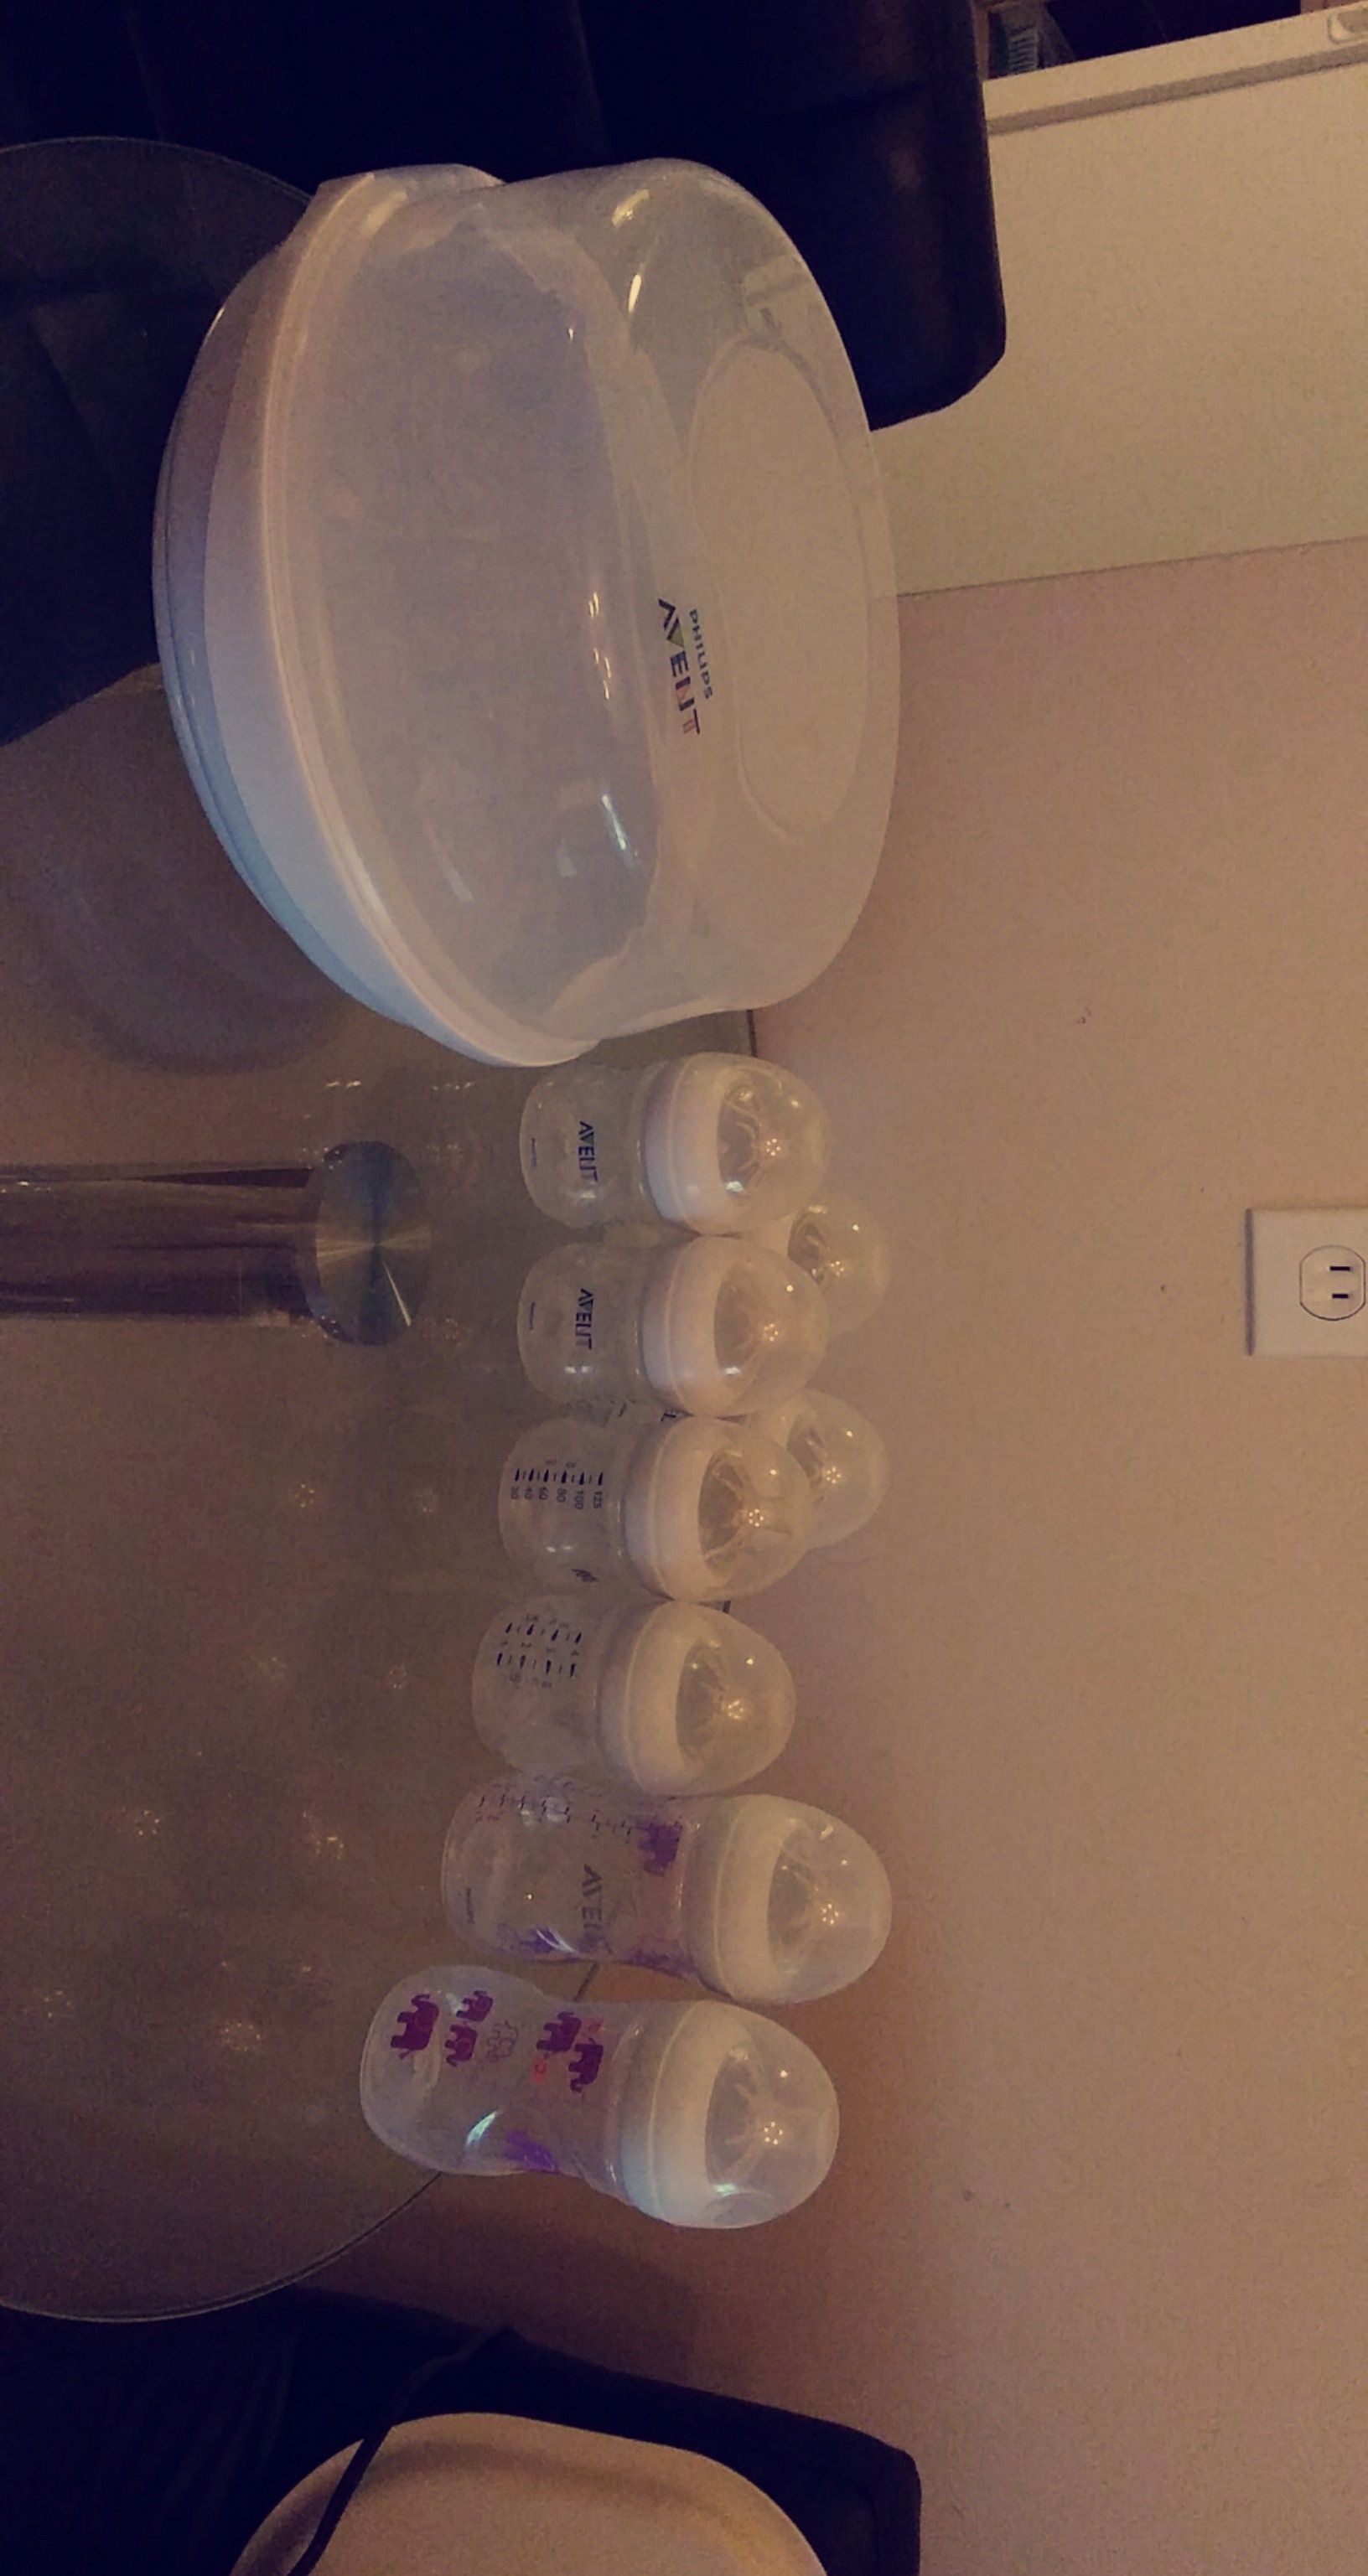 Avent baby bottles and cleaner